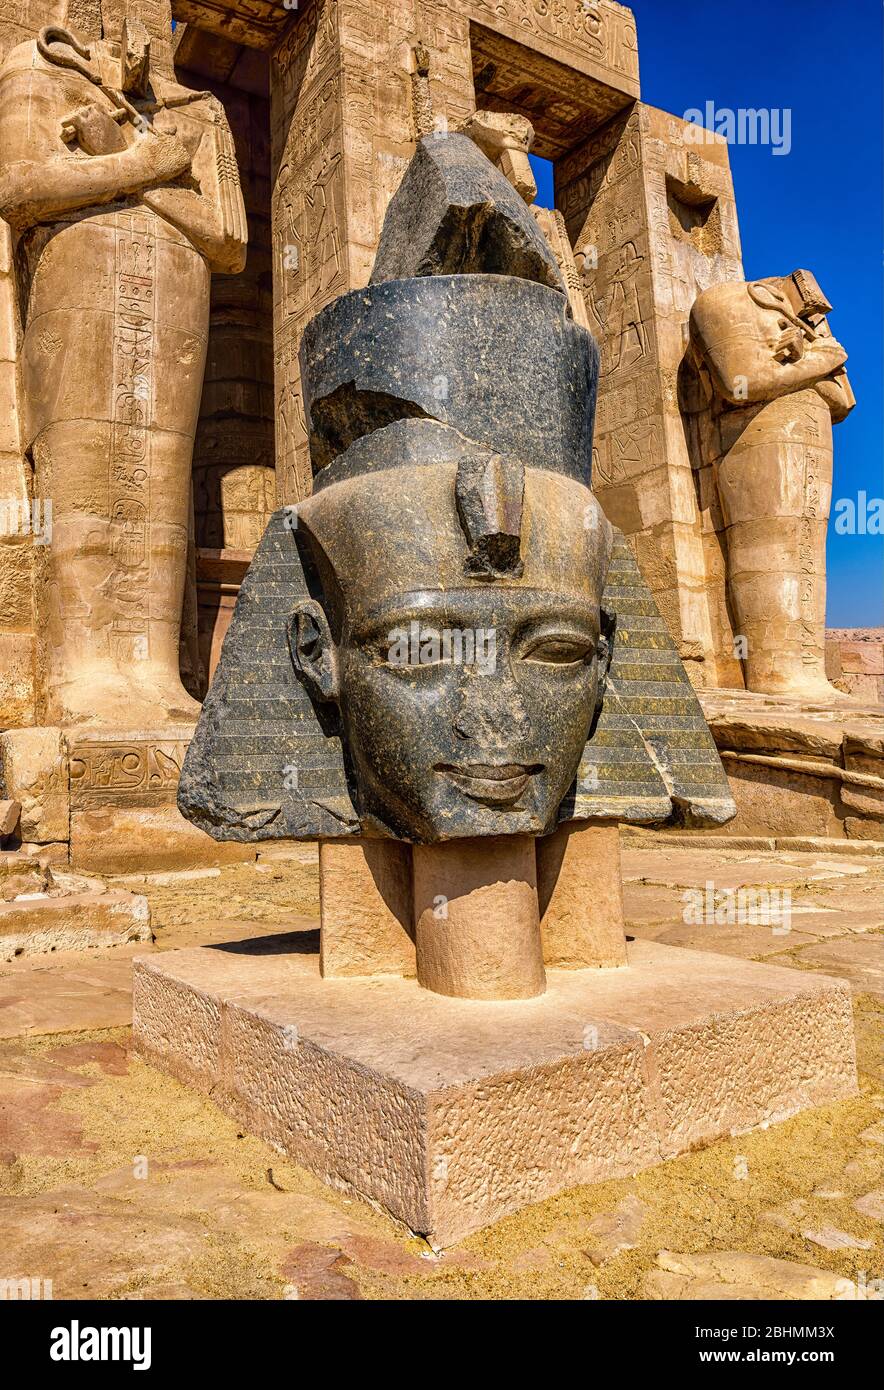 Granite head of Pharaoh Ramesses II in front of the feet of the Osirid statues in the Ramesseum Stock Photo